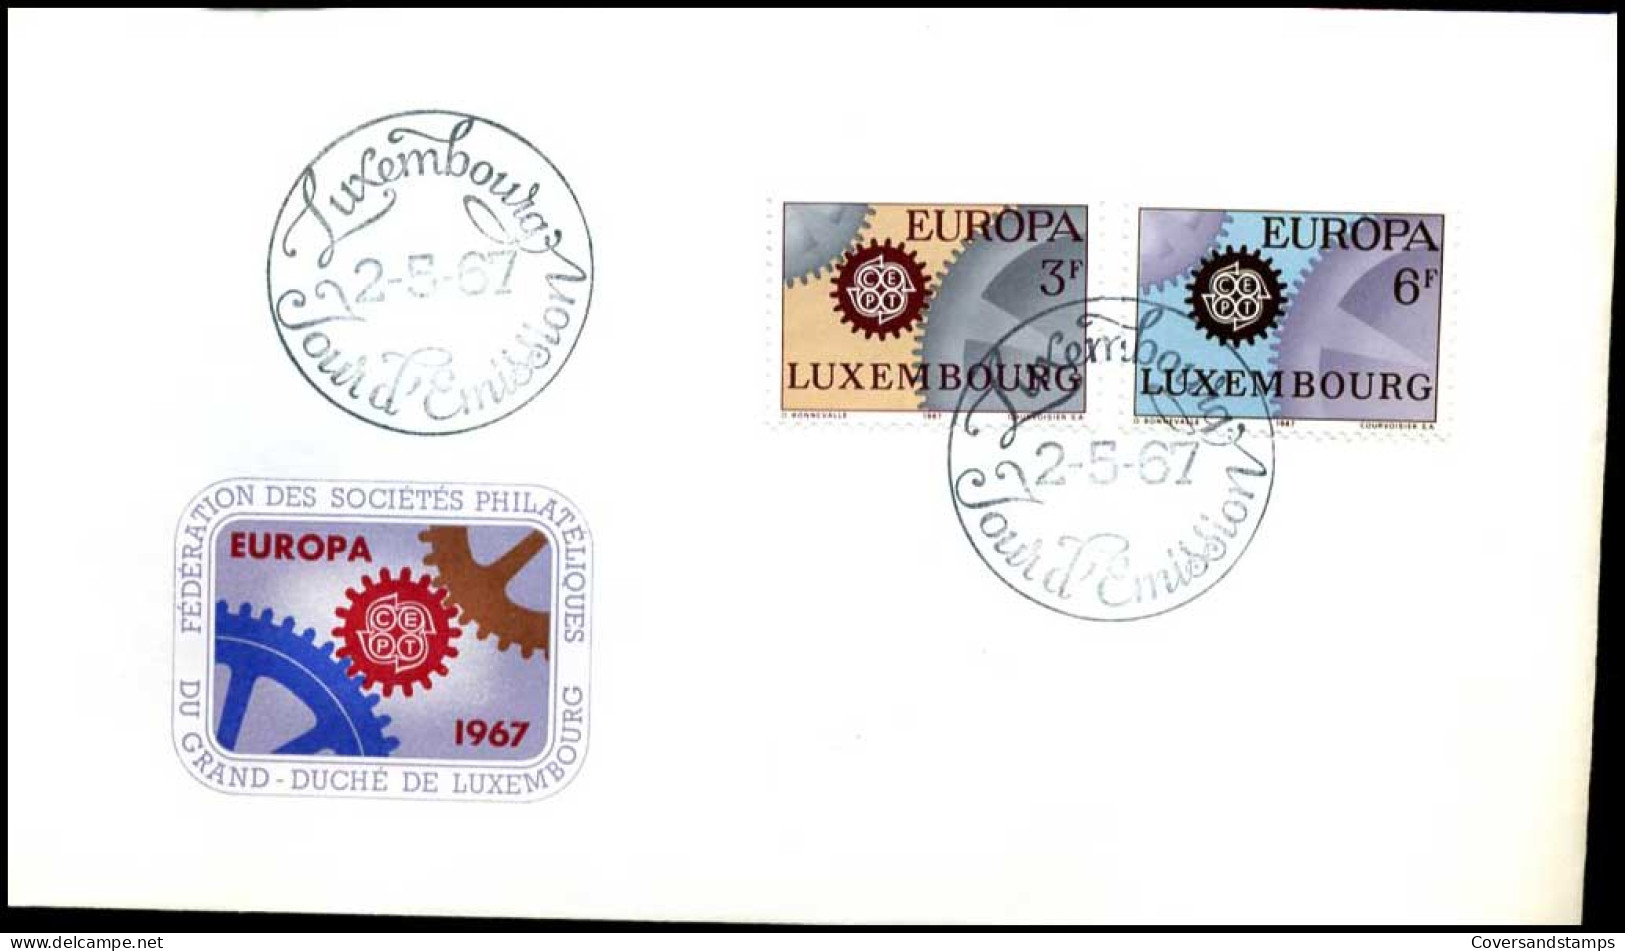  Luxembourg - FDC - Europa CEPT 1967 - 1967